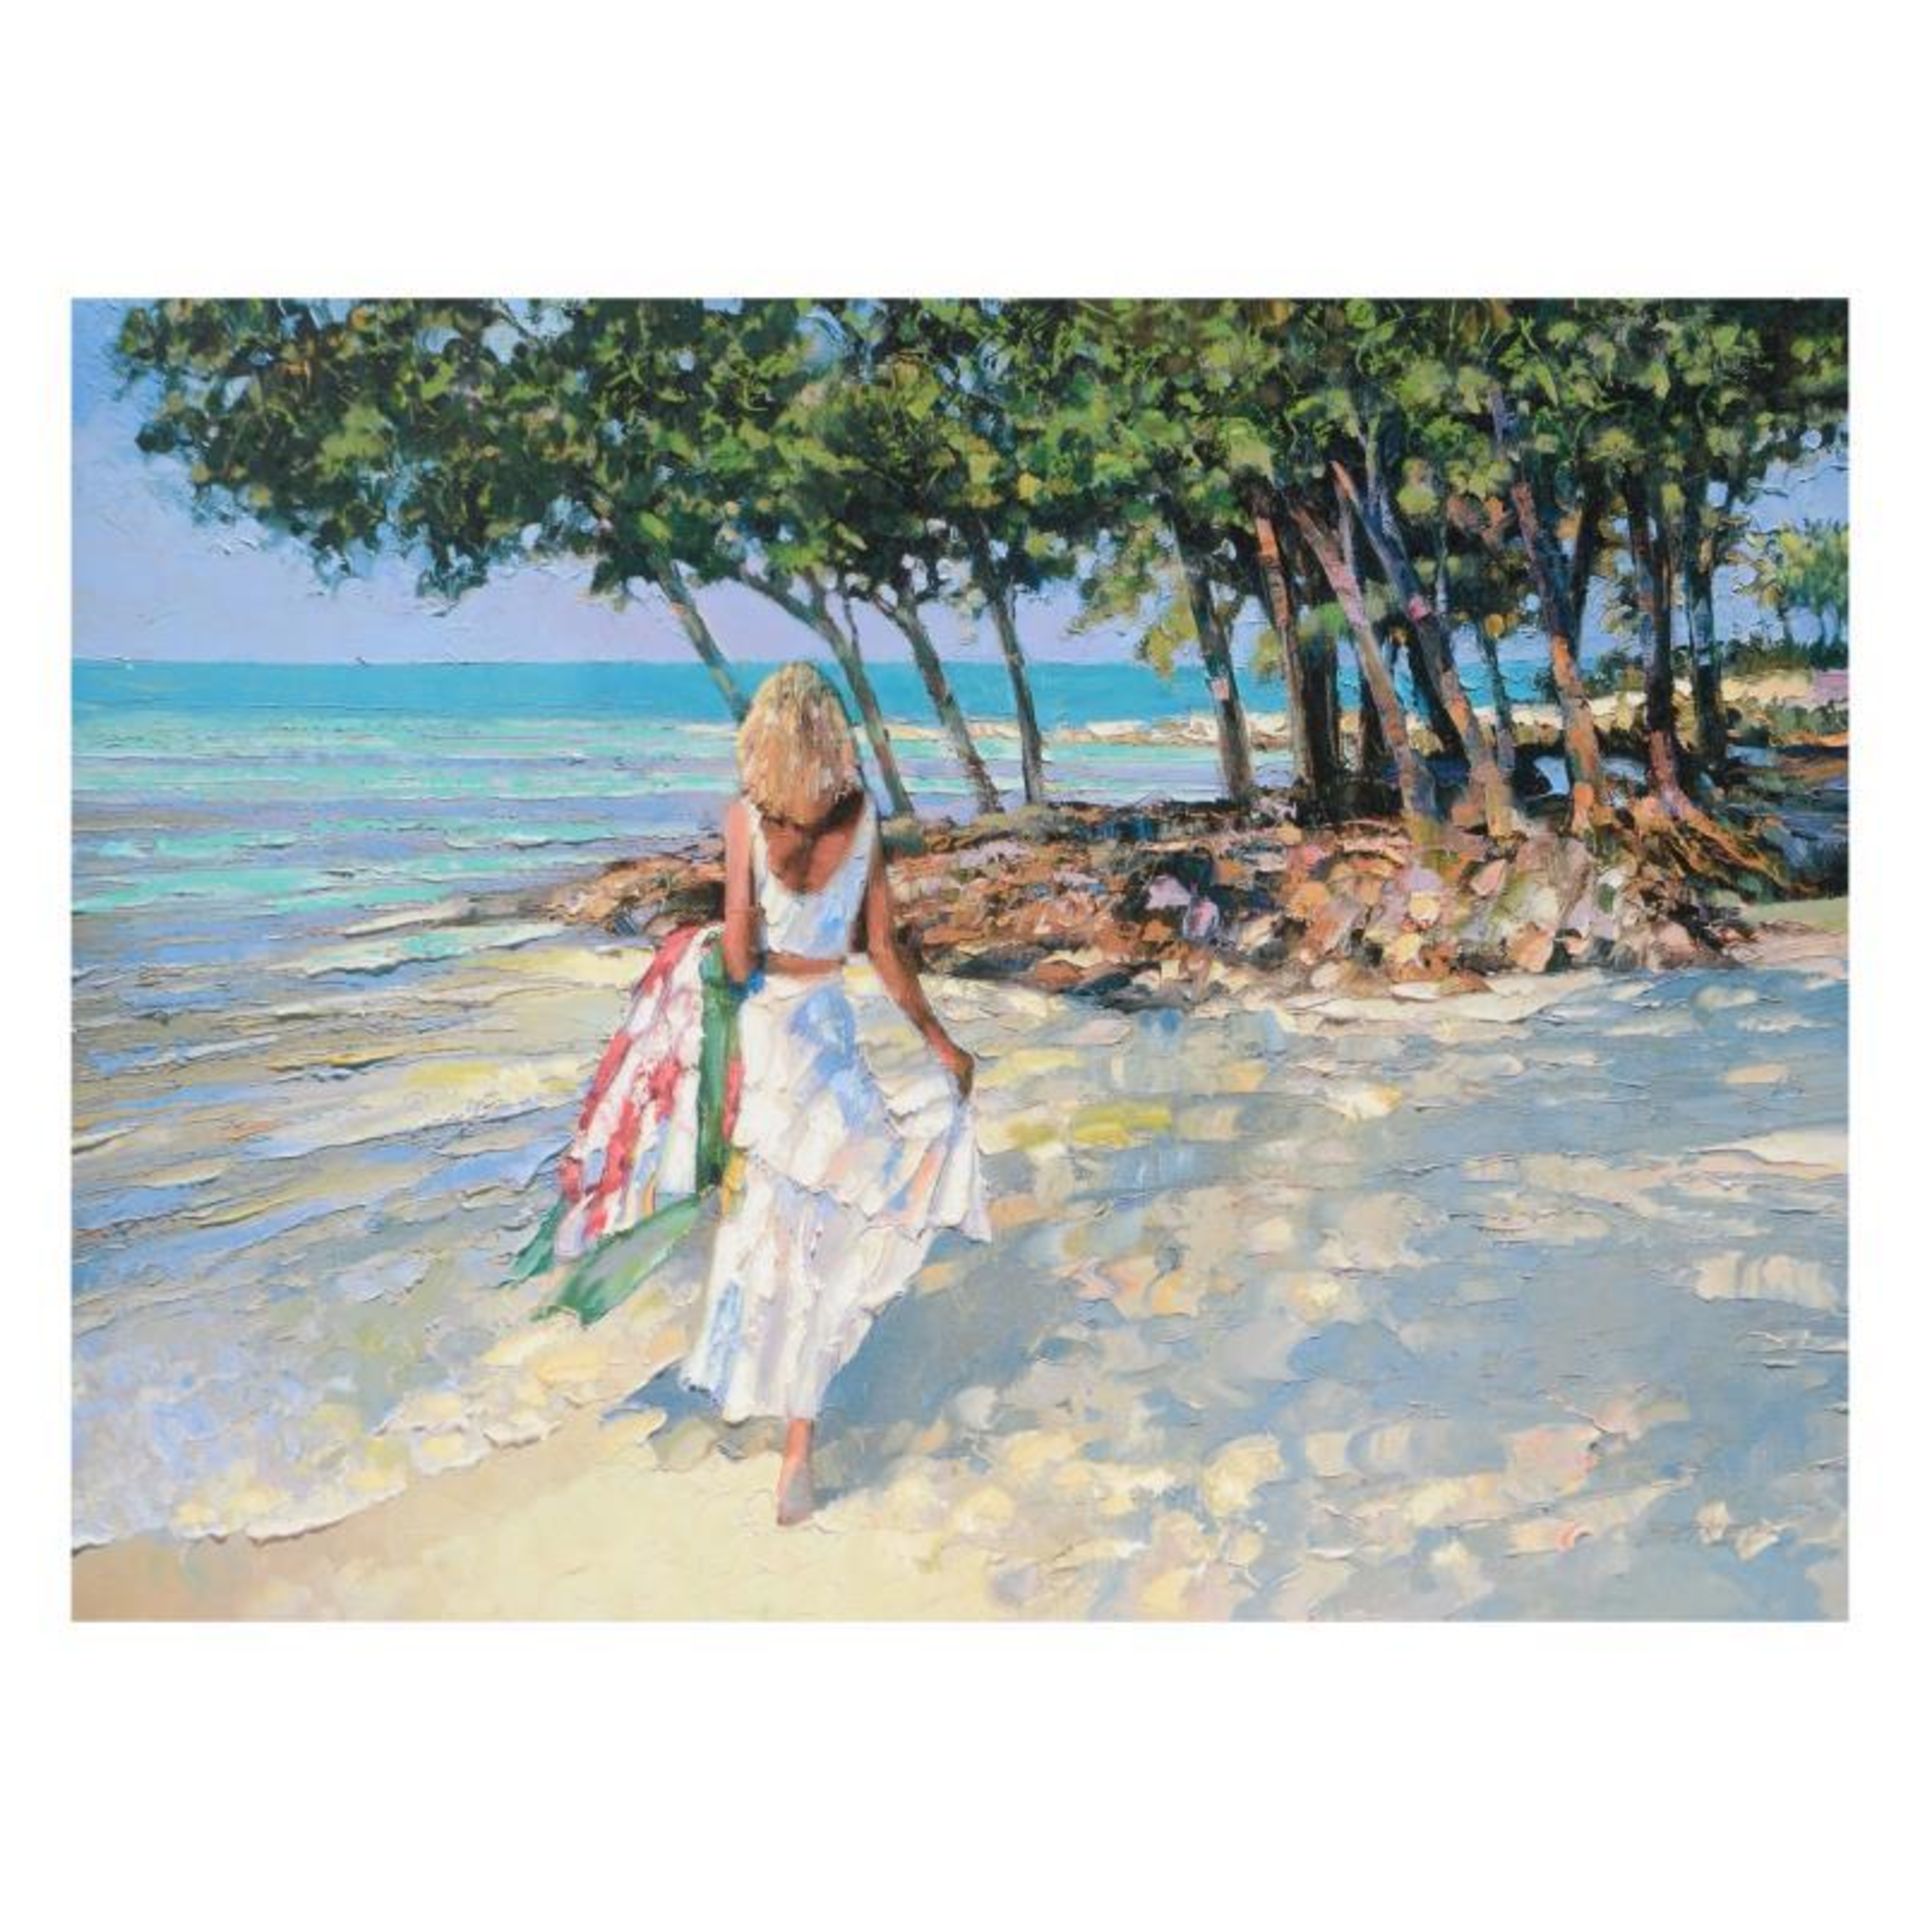 Howard Behrens (1933-2014), "My Beloved" Limited Edition on Canvas, Numbered and